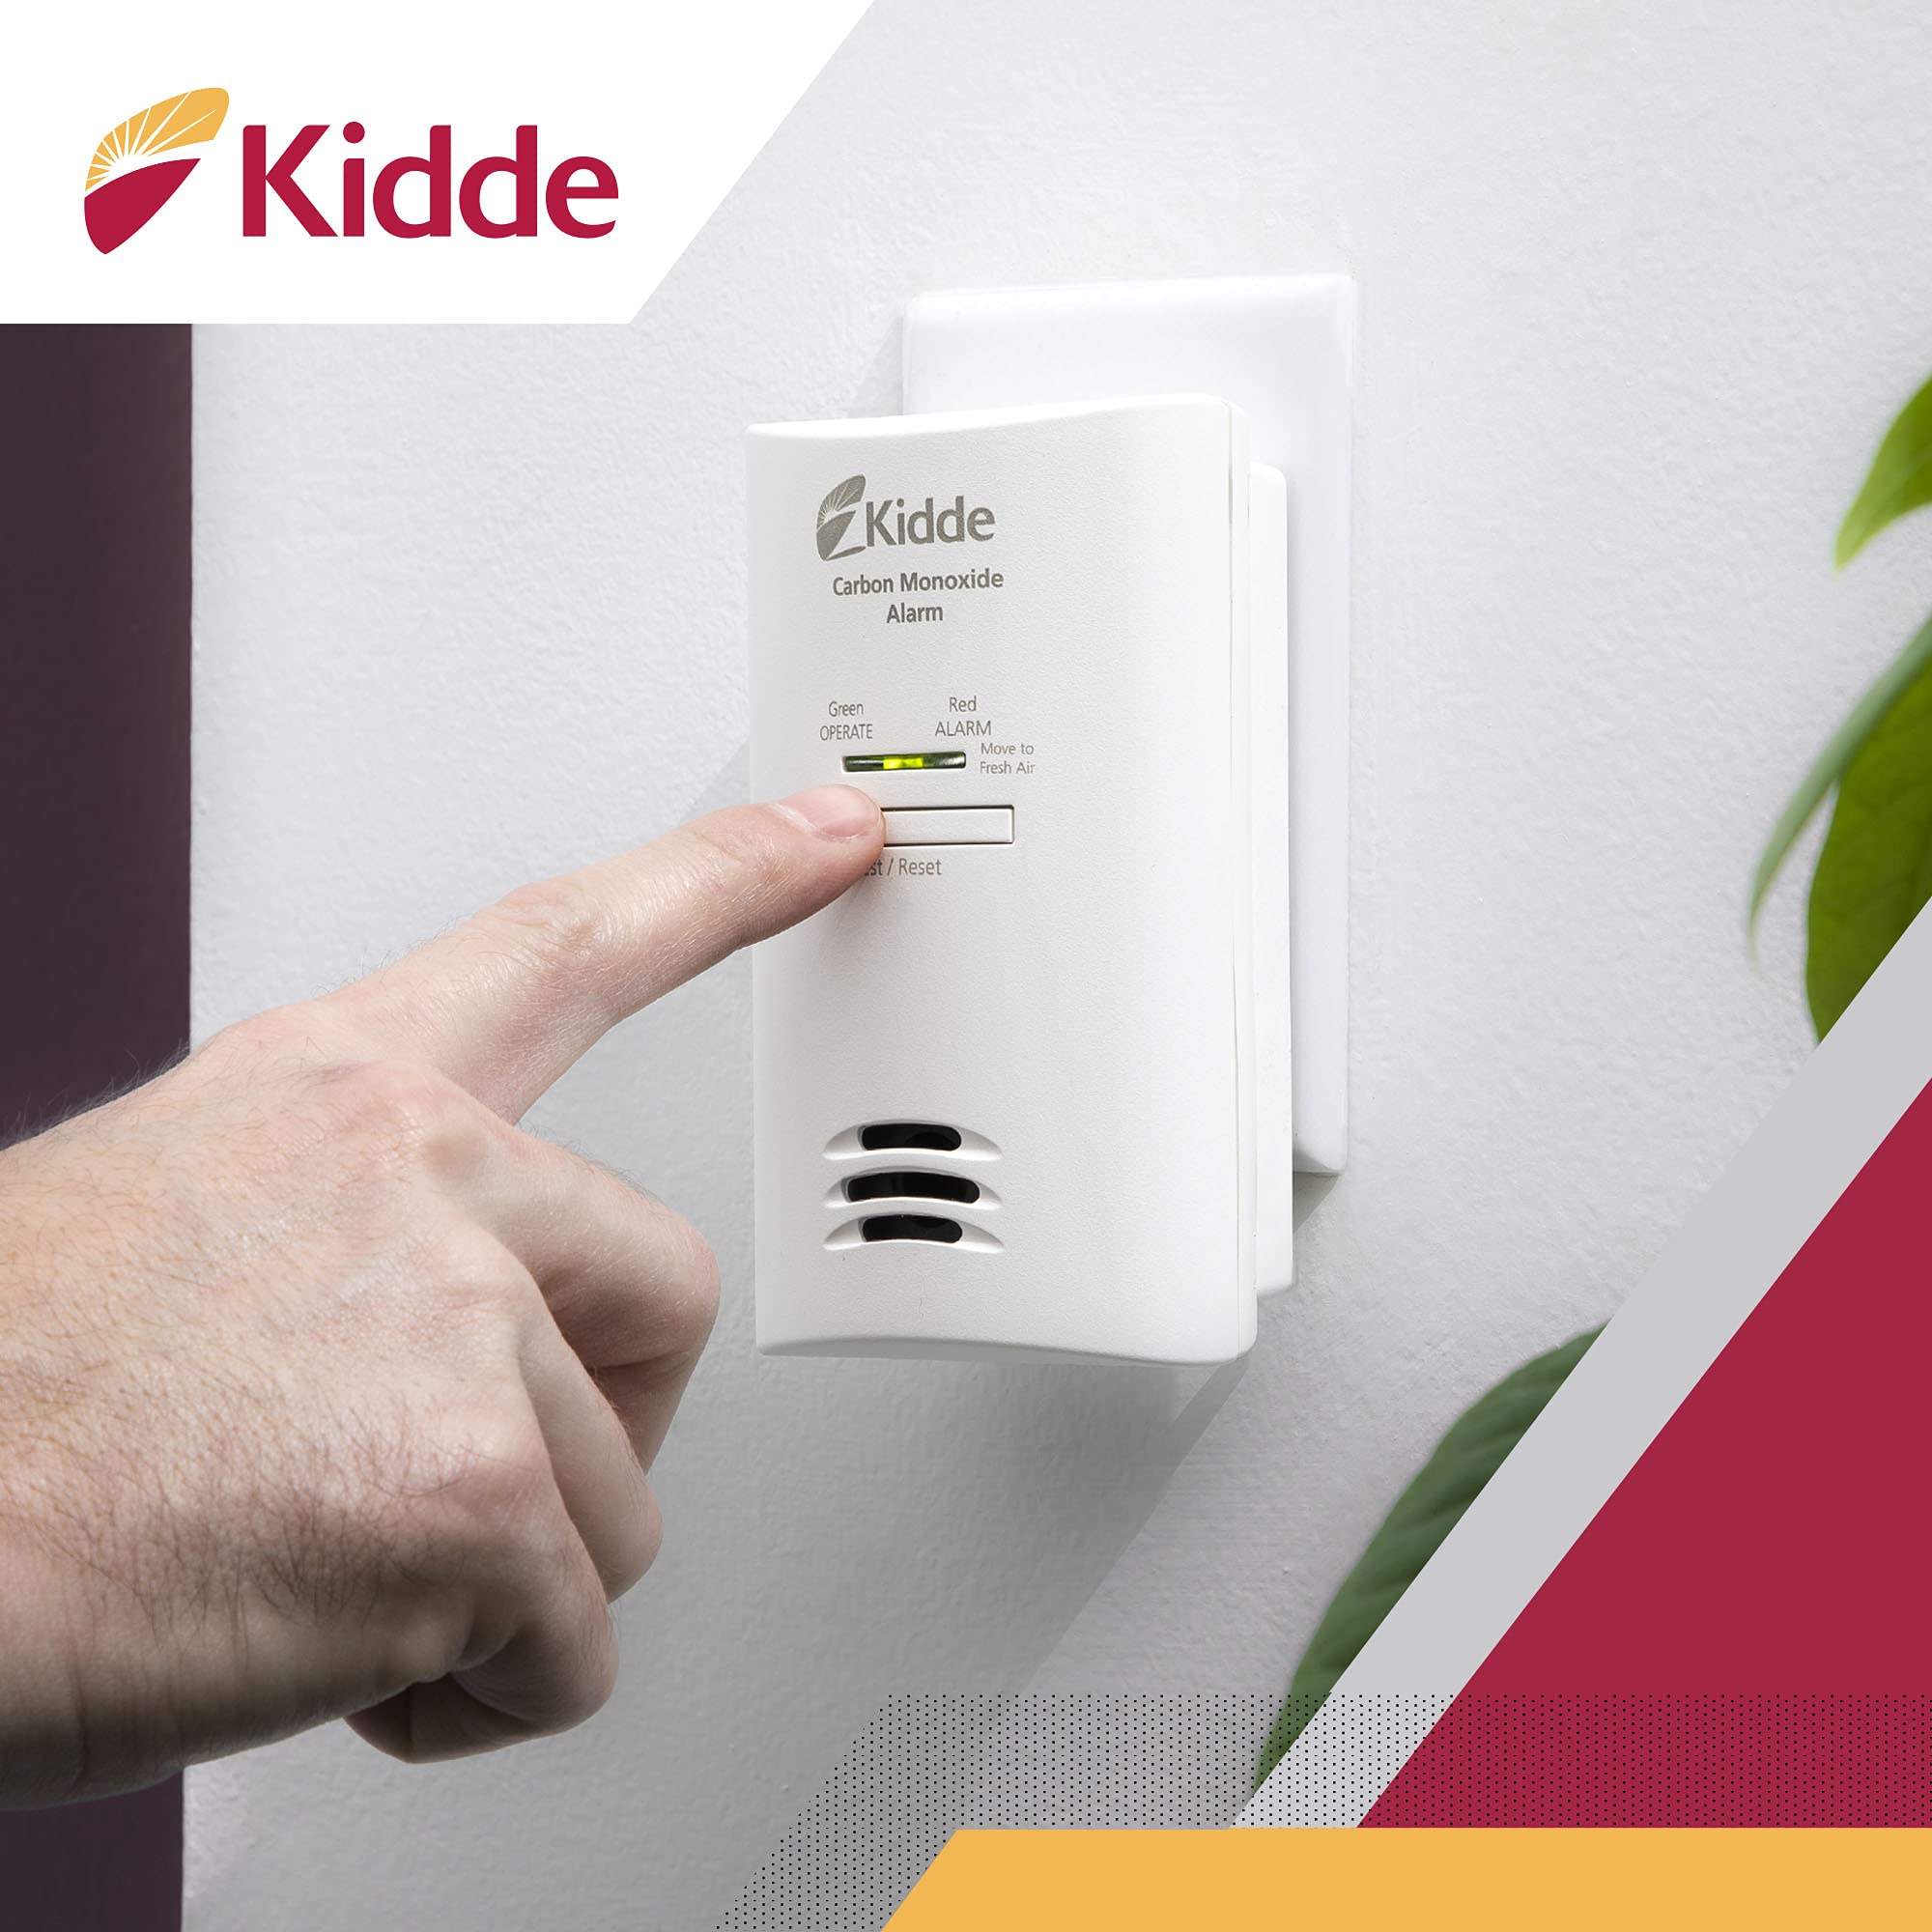 Kidde Carbon Monoxide Detector, Plug In Wall with AA Battery Backup, Test-Hush Button